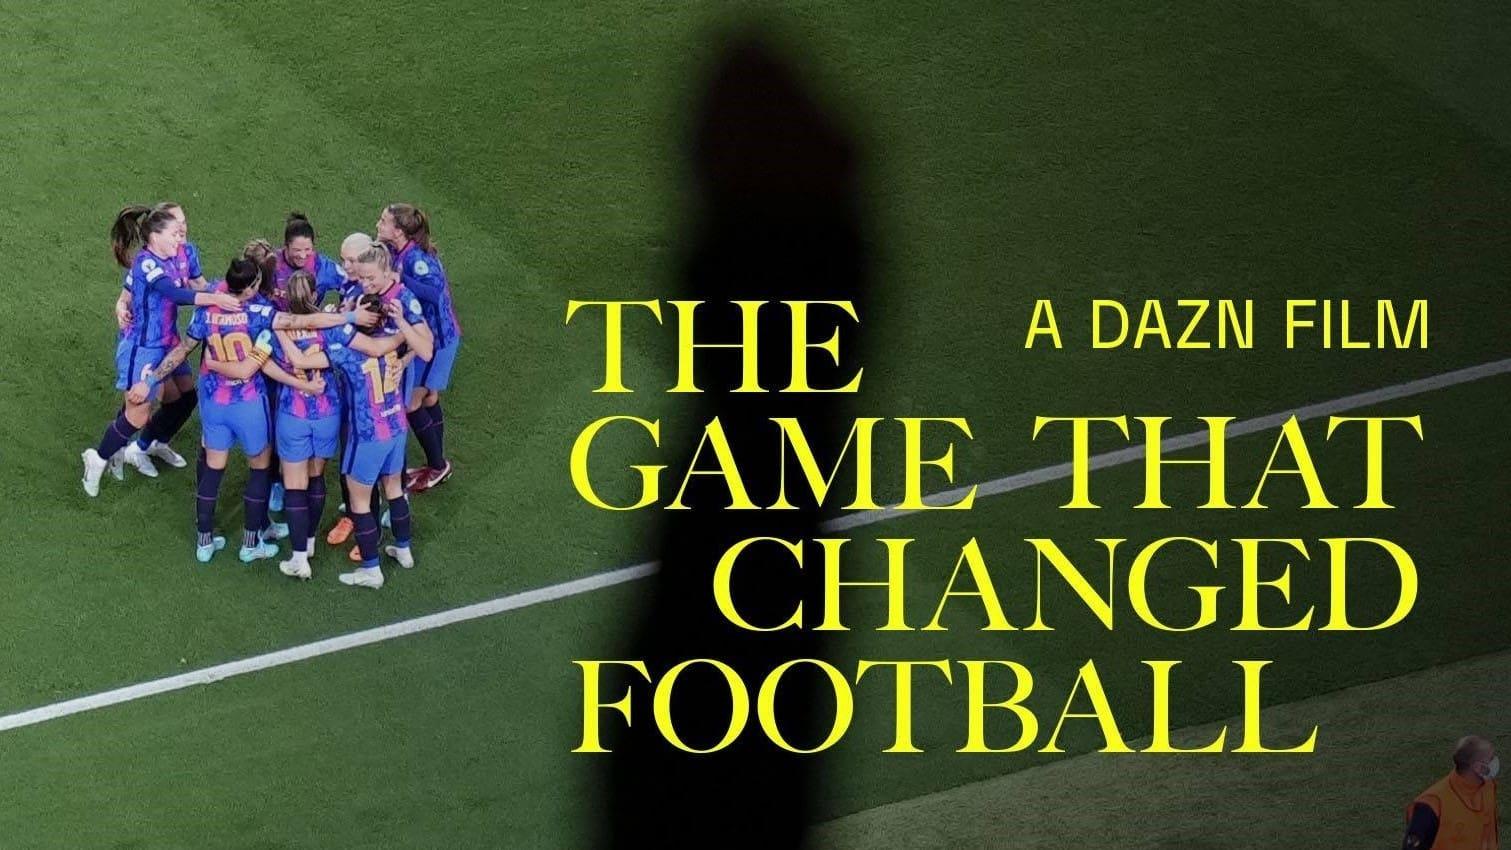 The Game That Changed Football backdrop